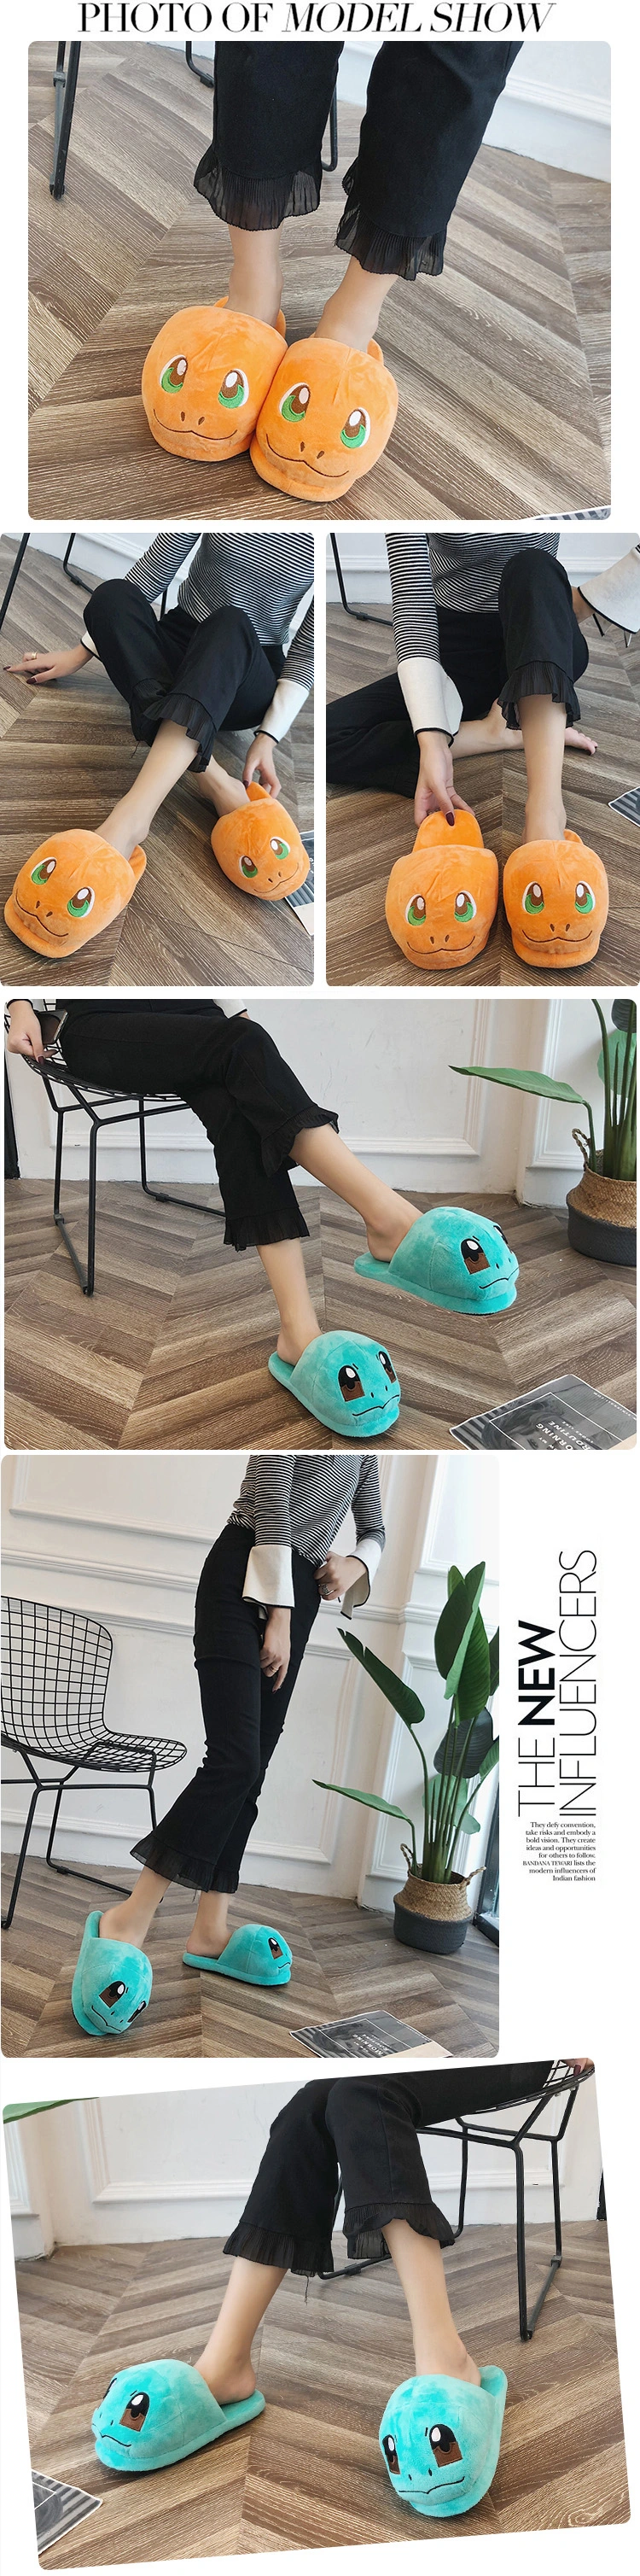 2020 Hot Sales Kids Slipper Fashion Girls Sandals Women Indoor Slippers Rubber Bottom Cute Home Shoes